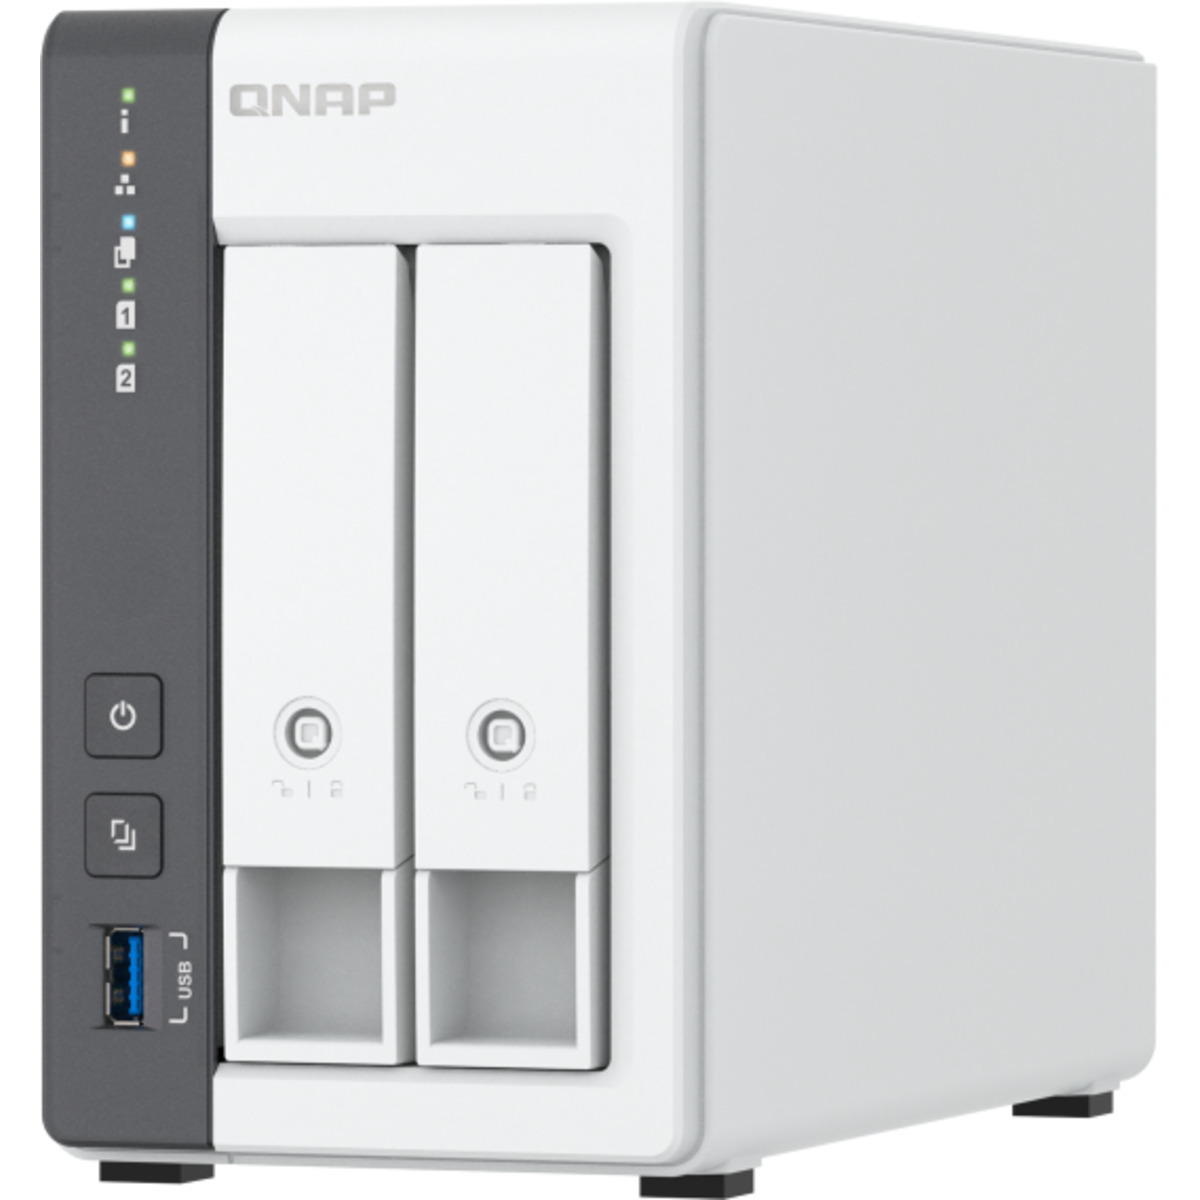 QNAP TS-216G 12tb 2-Bay Desktop Personal / Basic Home / Small Office NAS - Network Attached Storage Device 2x6tb Western Digital Red Plus WD60EFPX 3.5 5640rpm SATA 6Gb/s HDD NAS Class Drives Installed - Burn-In Tested TS-216G